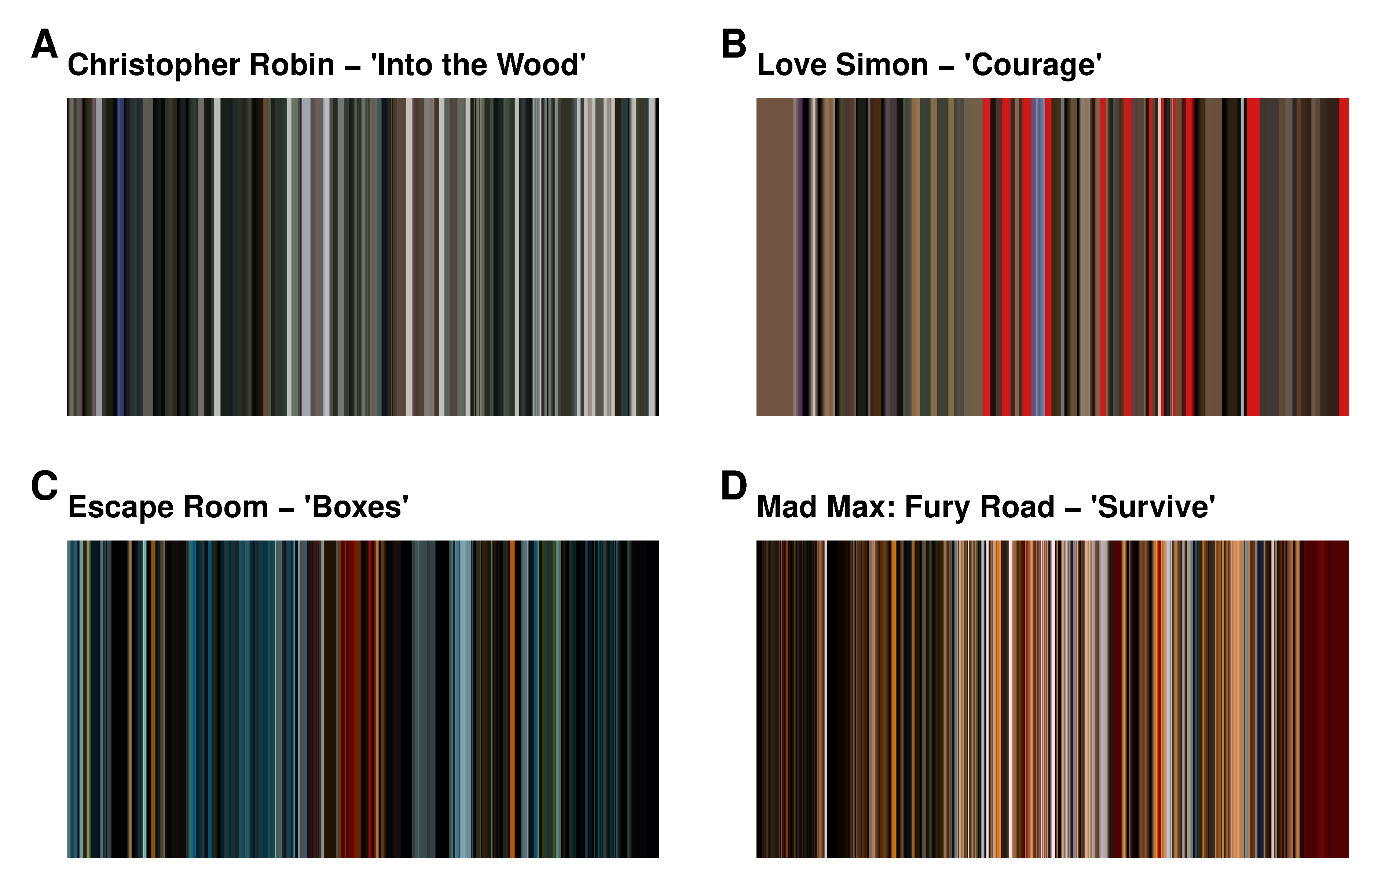 Smoothed barcodes for four trailers. (A) The dominance of unsaturated colours in Christopher Robin – ‘ Into the Wood.’ (B) Bright marketing sections in Love Simon – ‘ Courage .’ (C) Orange and azure hues in Escape Room – ‘Boxes.’ (D) Monochromatic orange hues in Mad Max Fury Road – ‘ Survive ’.